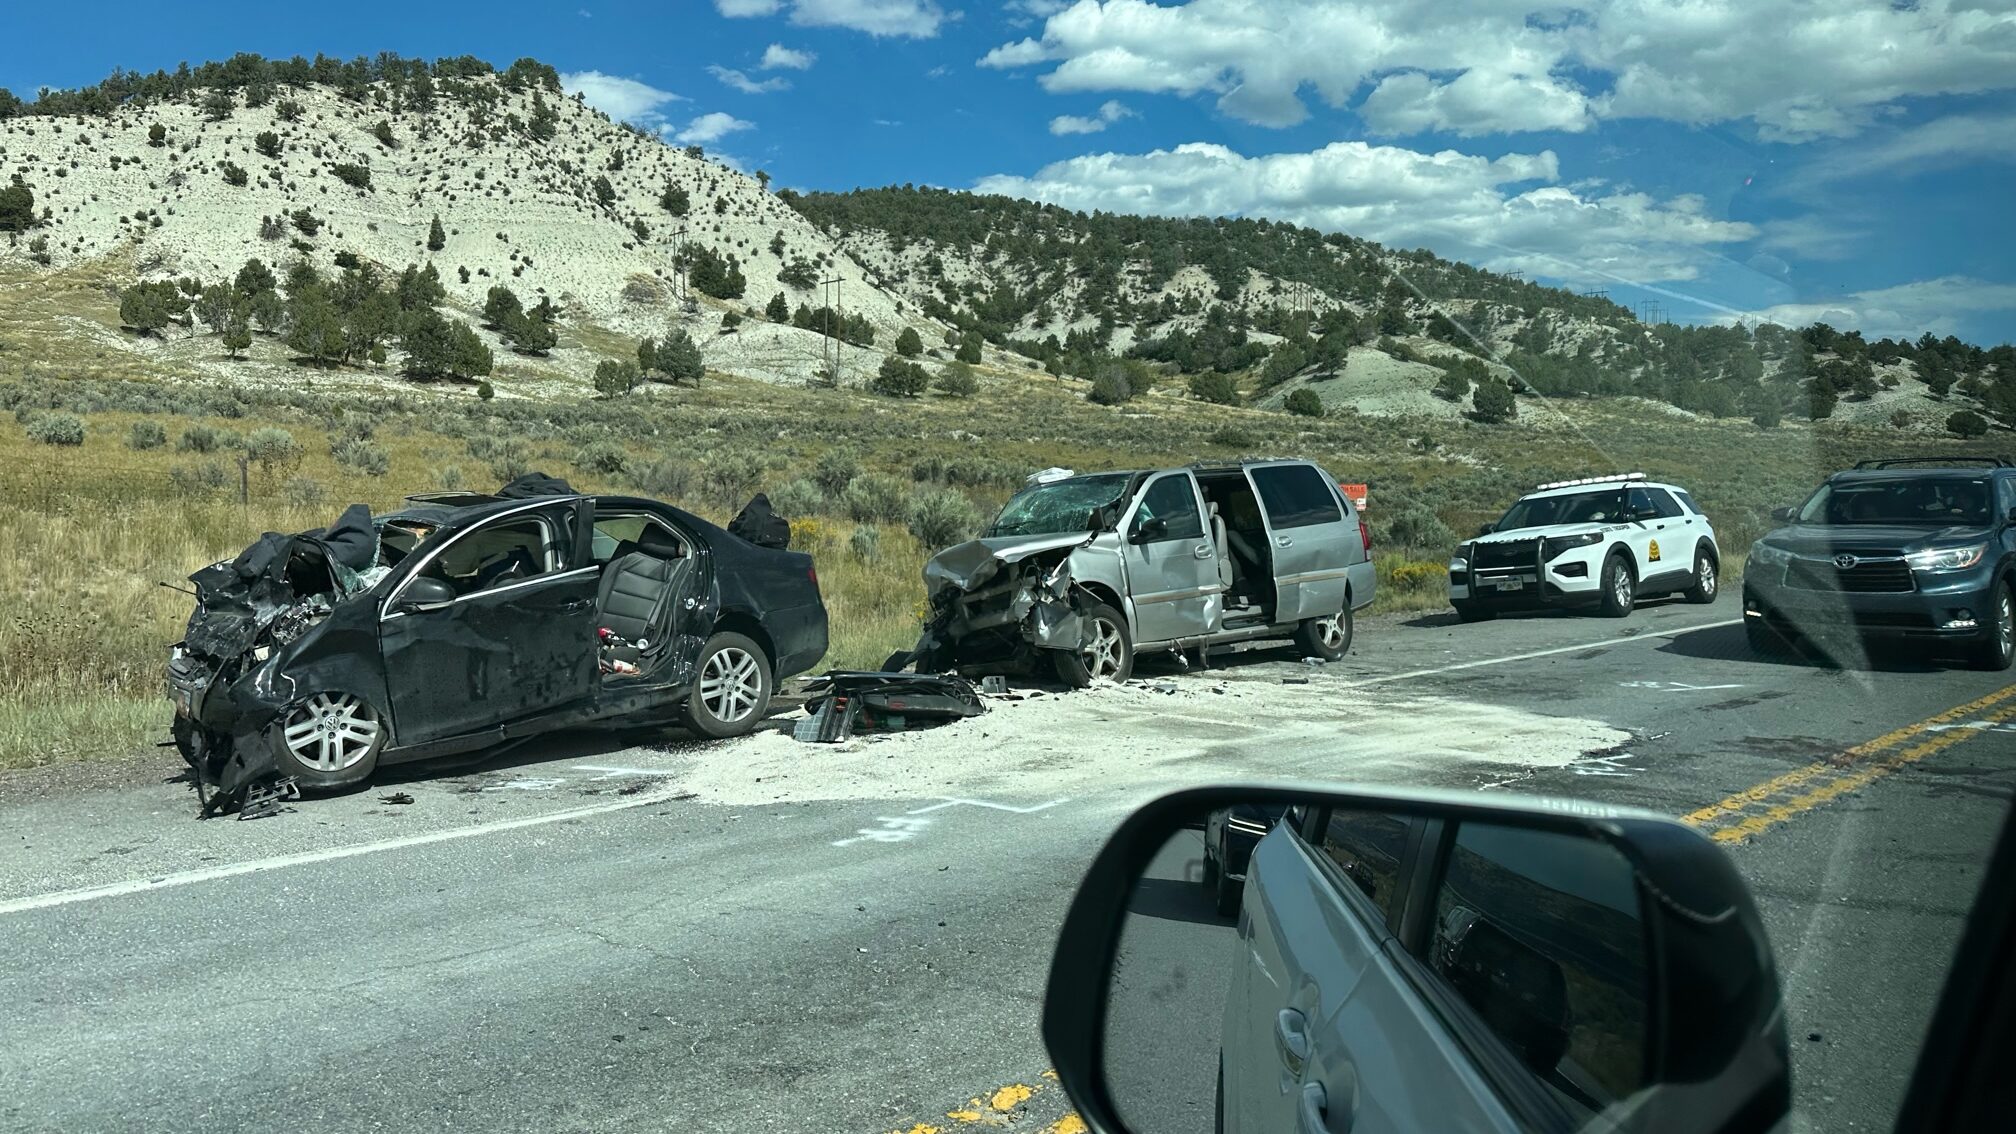 SPANISH FORK, Utah -- A person was killed in a head-on collision traveling eastbound on US-6 throug...